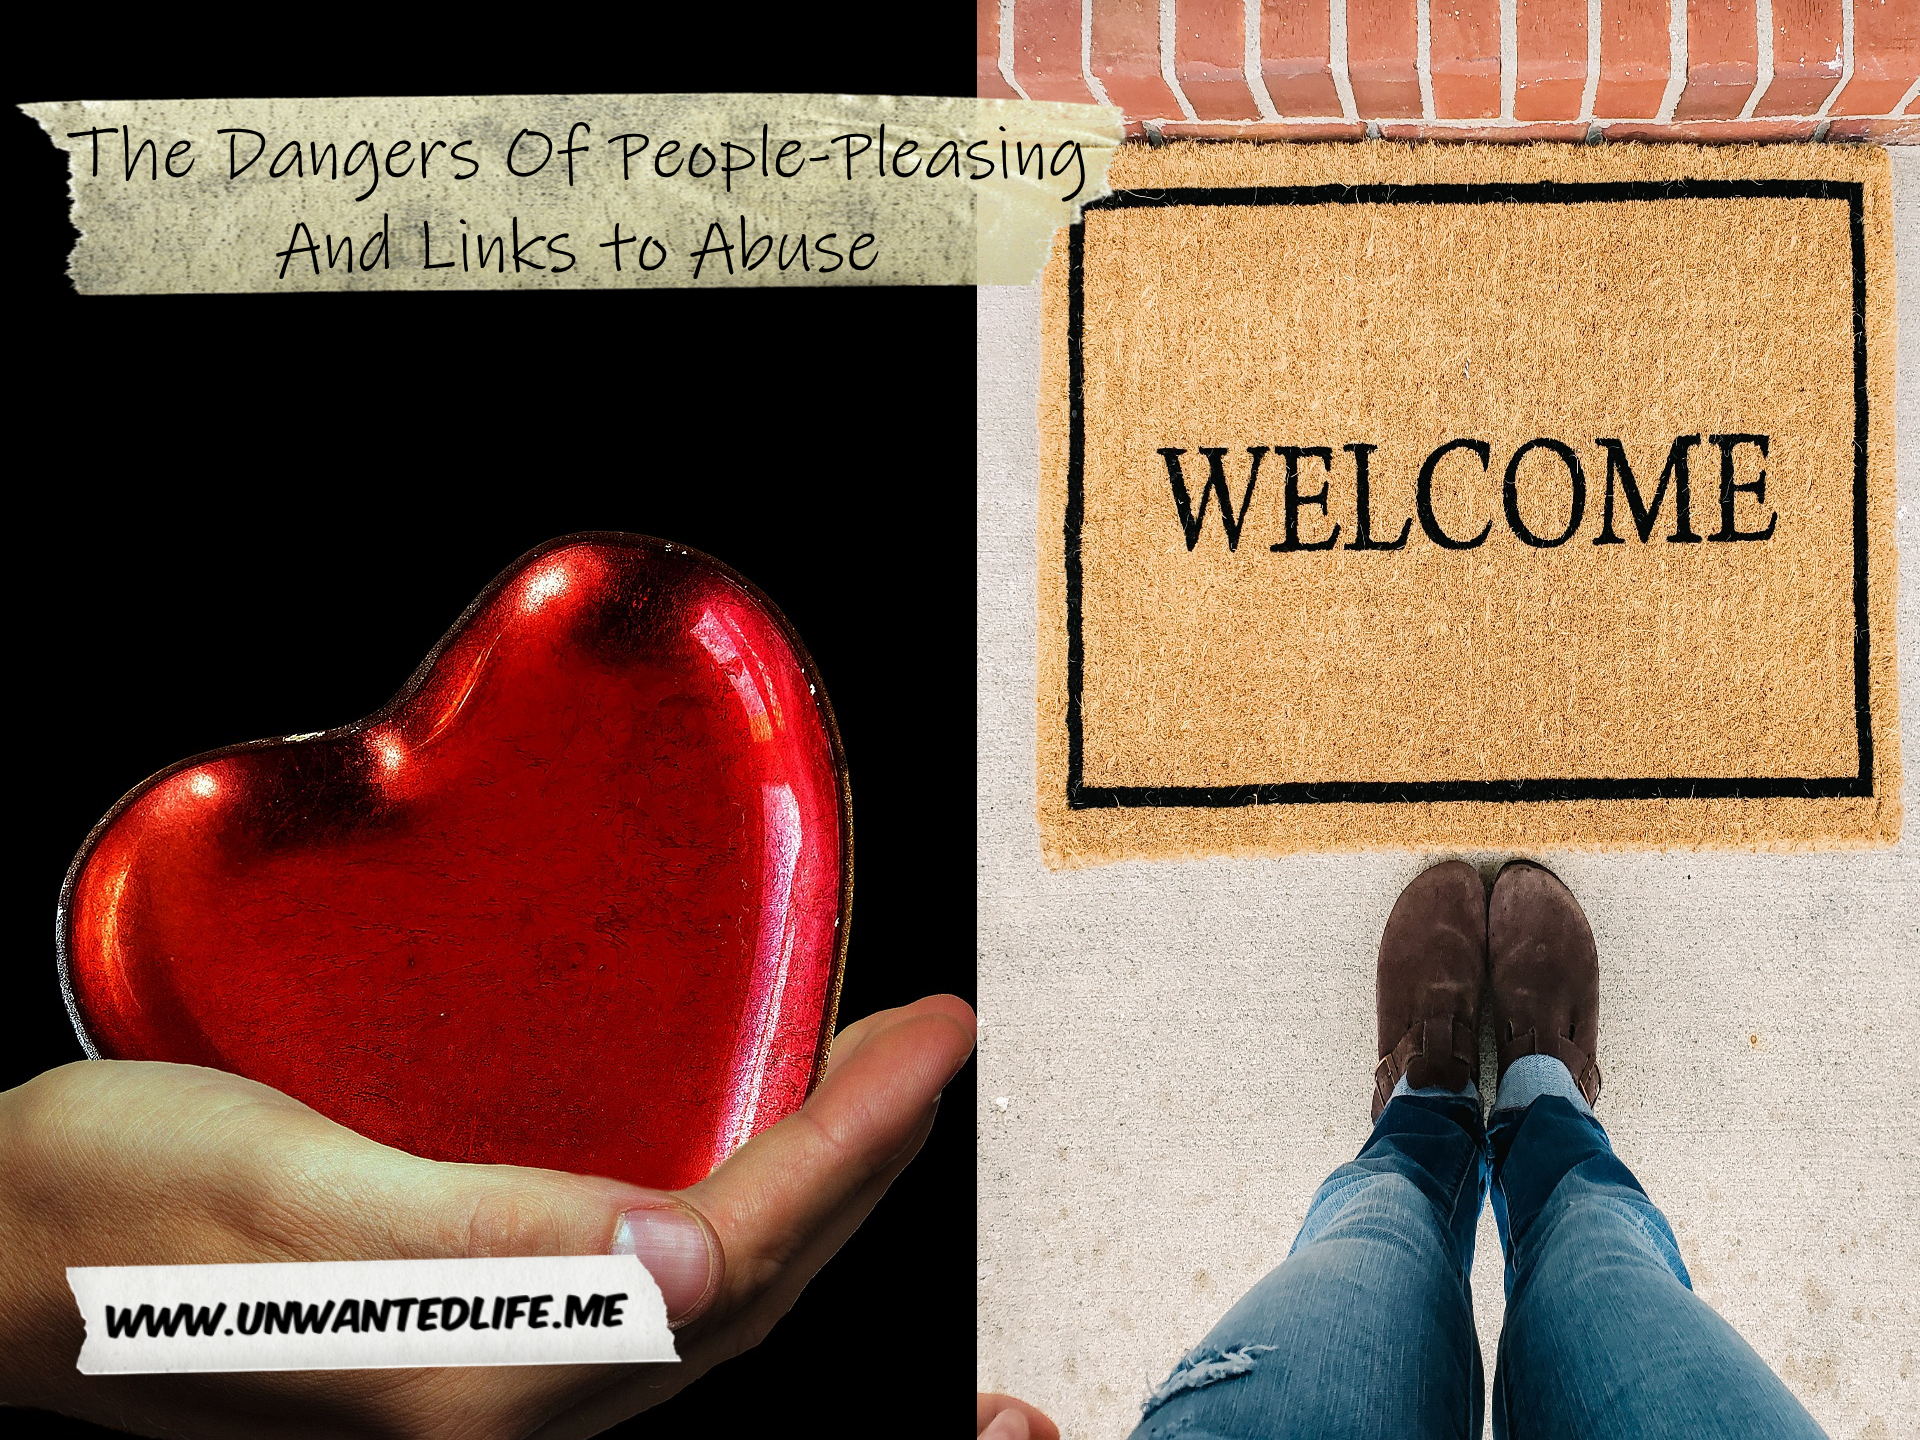 The image is split in two down the middle with the left image being of a white hand holding a heart and the left image being of a doormat that says "welcome" to represent - The Dangers Of People-Pleasing And Links to Abuse